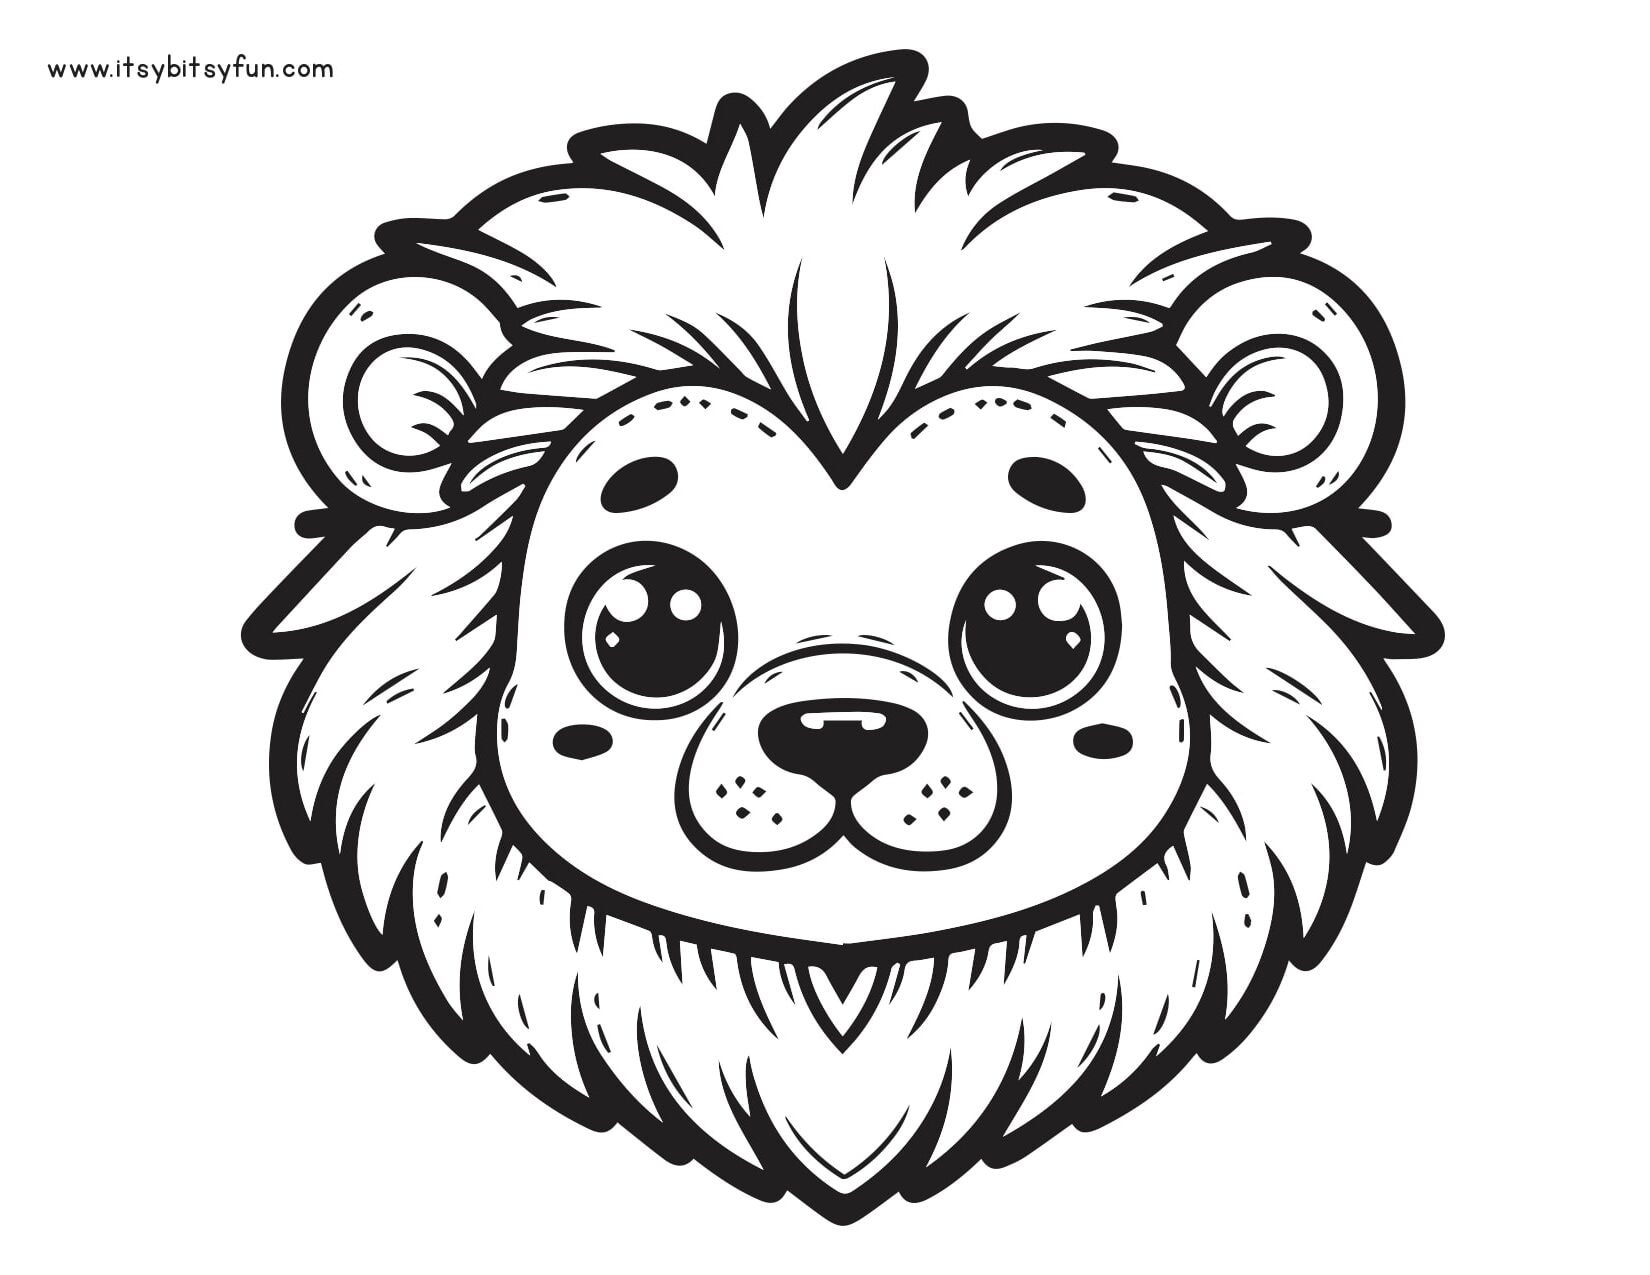 Head of a lion to color.